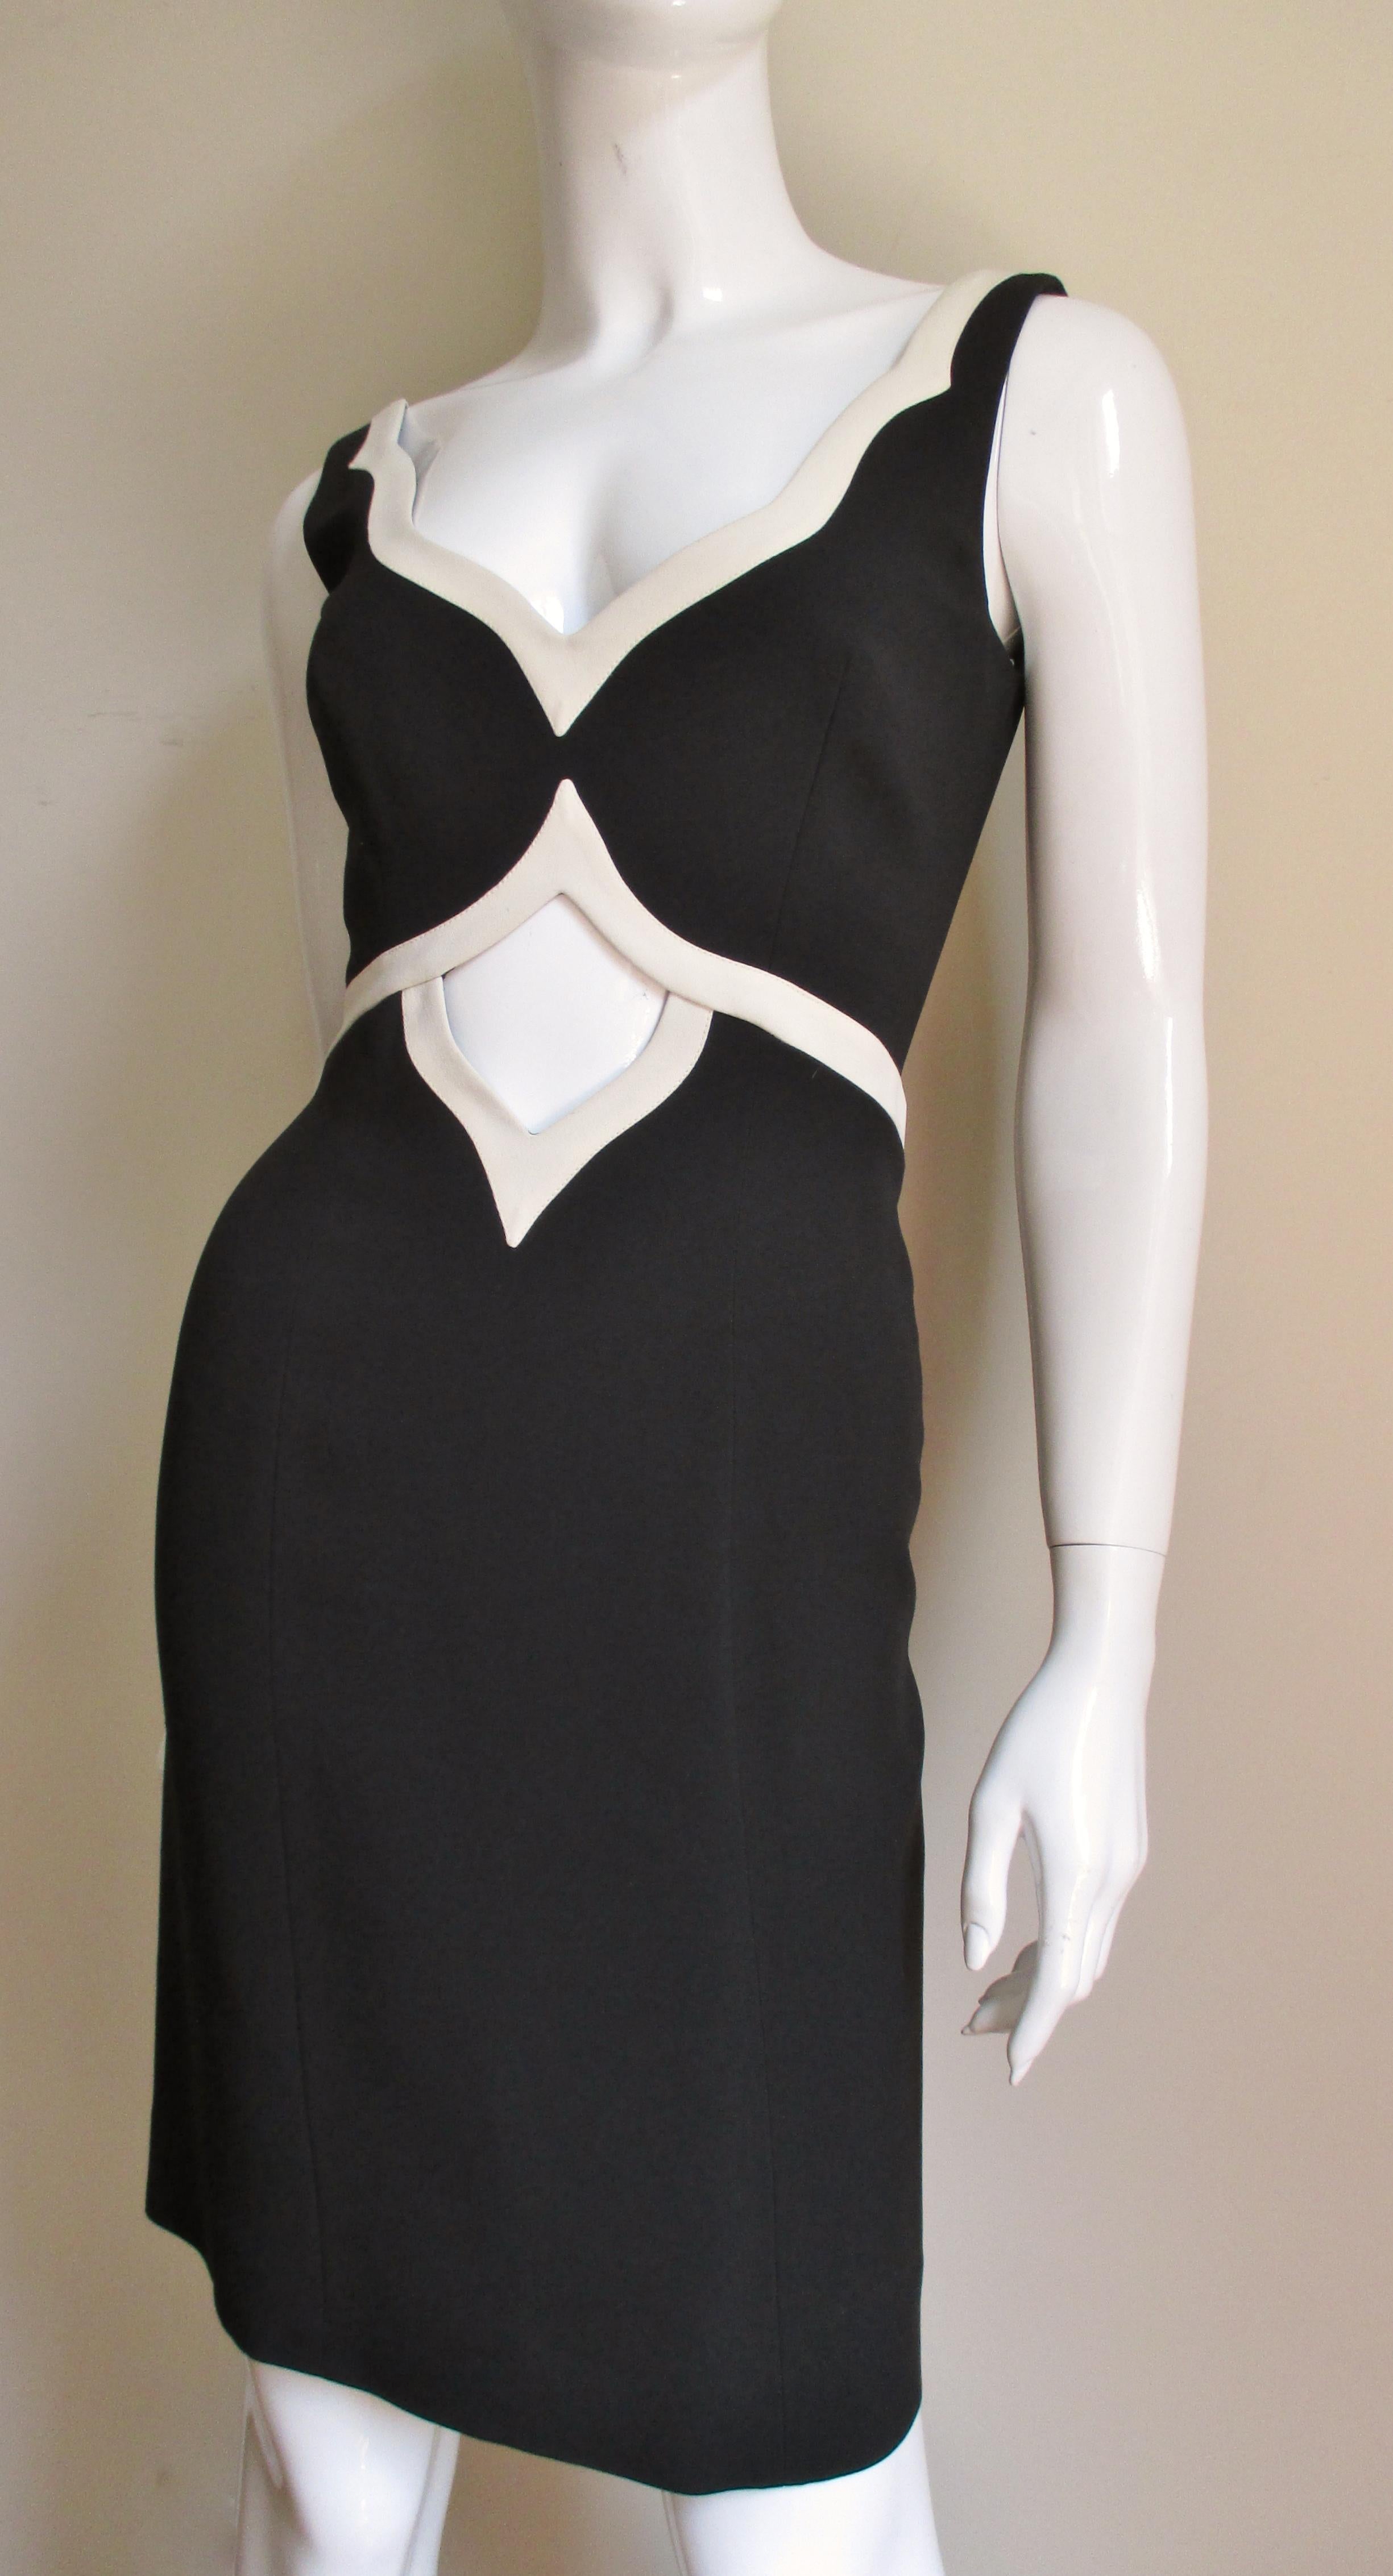 A fabulous dress from Moschino Couture in black with off white trim.  It is sleeveless with a V neckline, a waist cut out below it and a low cut back, all trimmed in off white. The dress has a back invisible zipper and is fully lined. 
Fits sizes